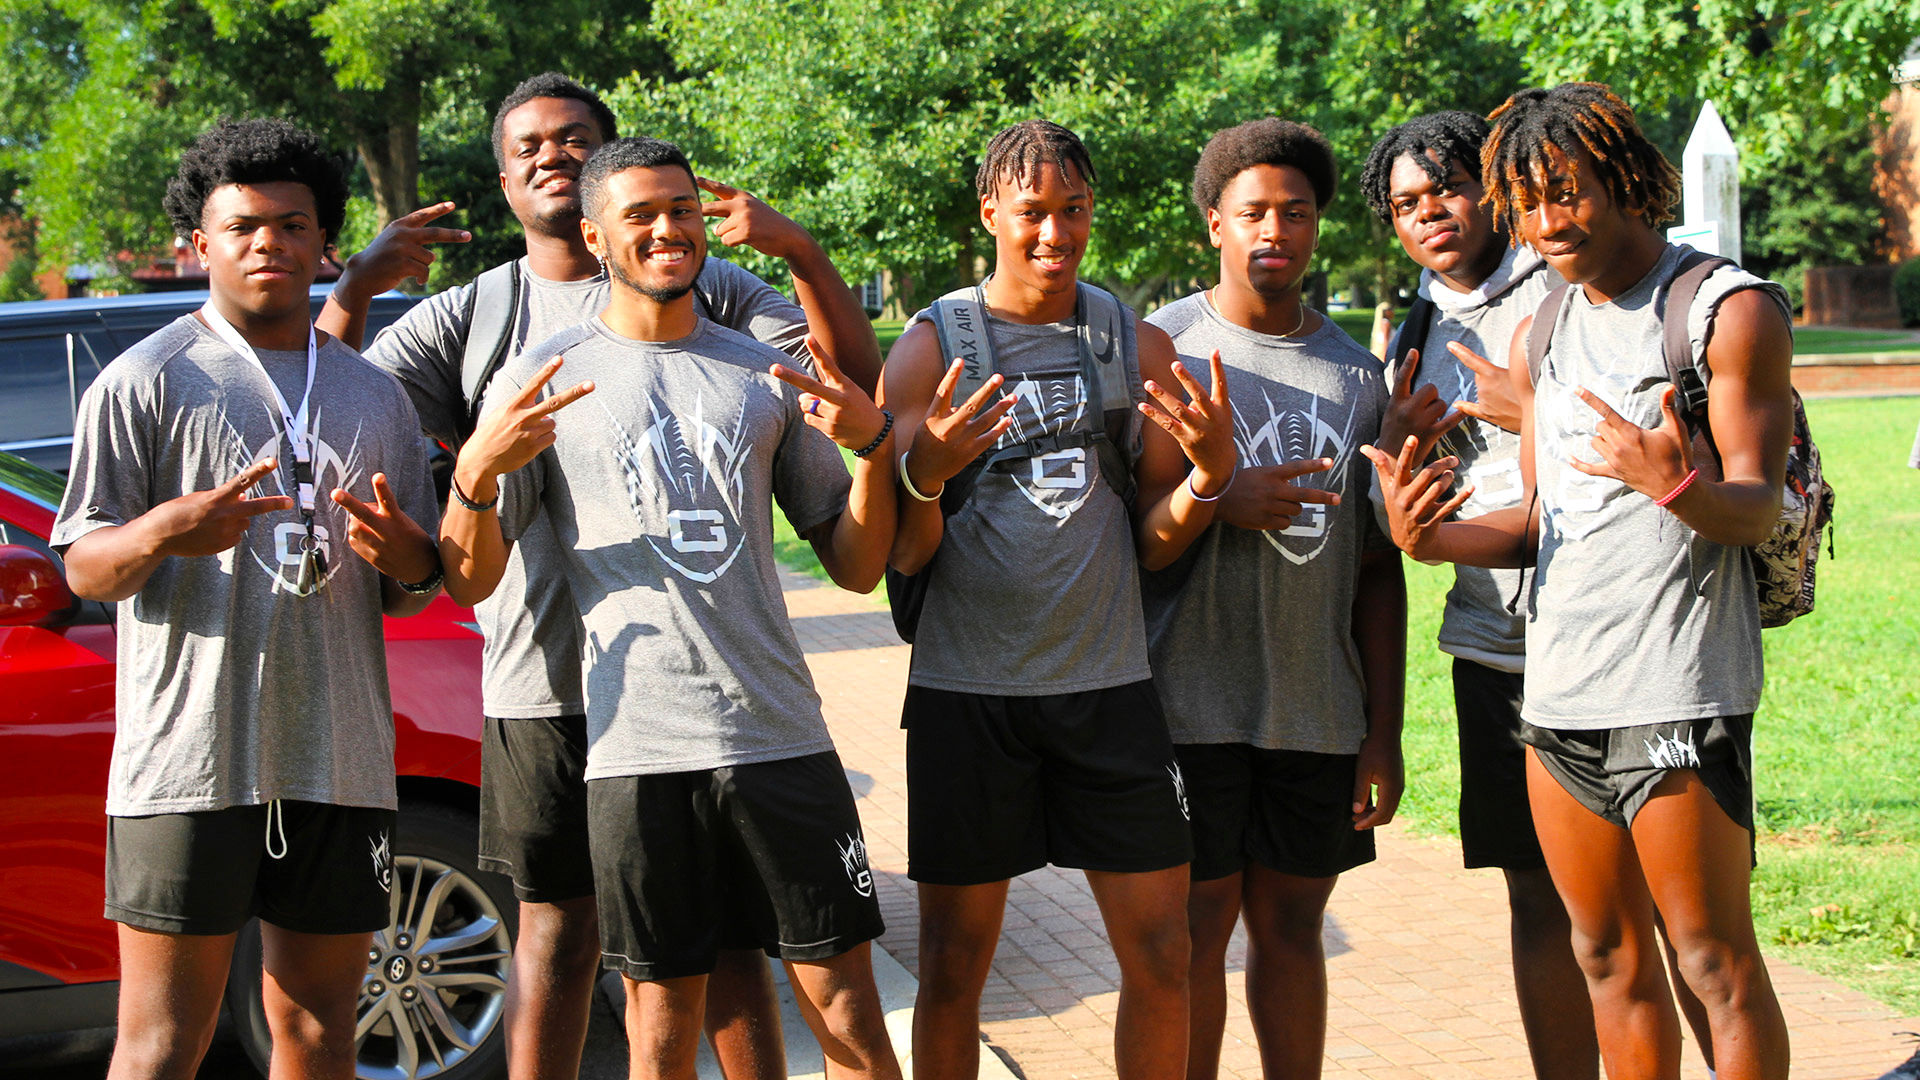 Seven members of Guilford's football team take a group photo while waiting to help new student carry heavy items into res-hall rooms.